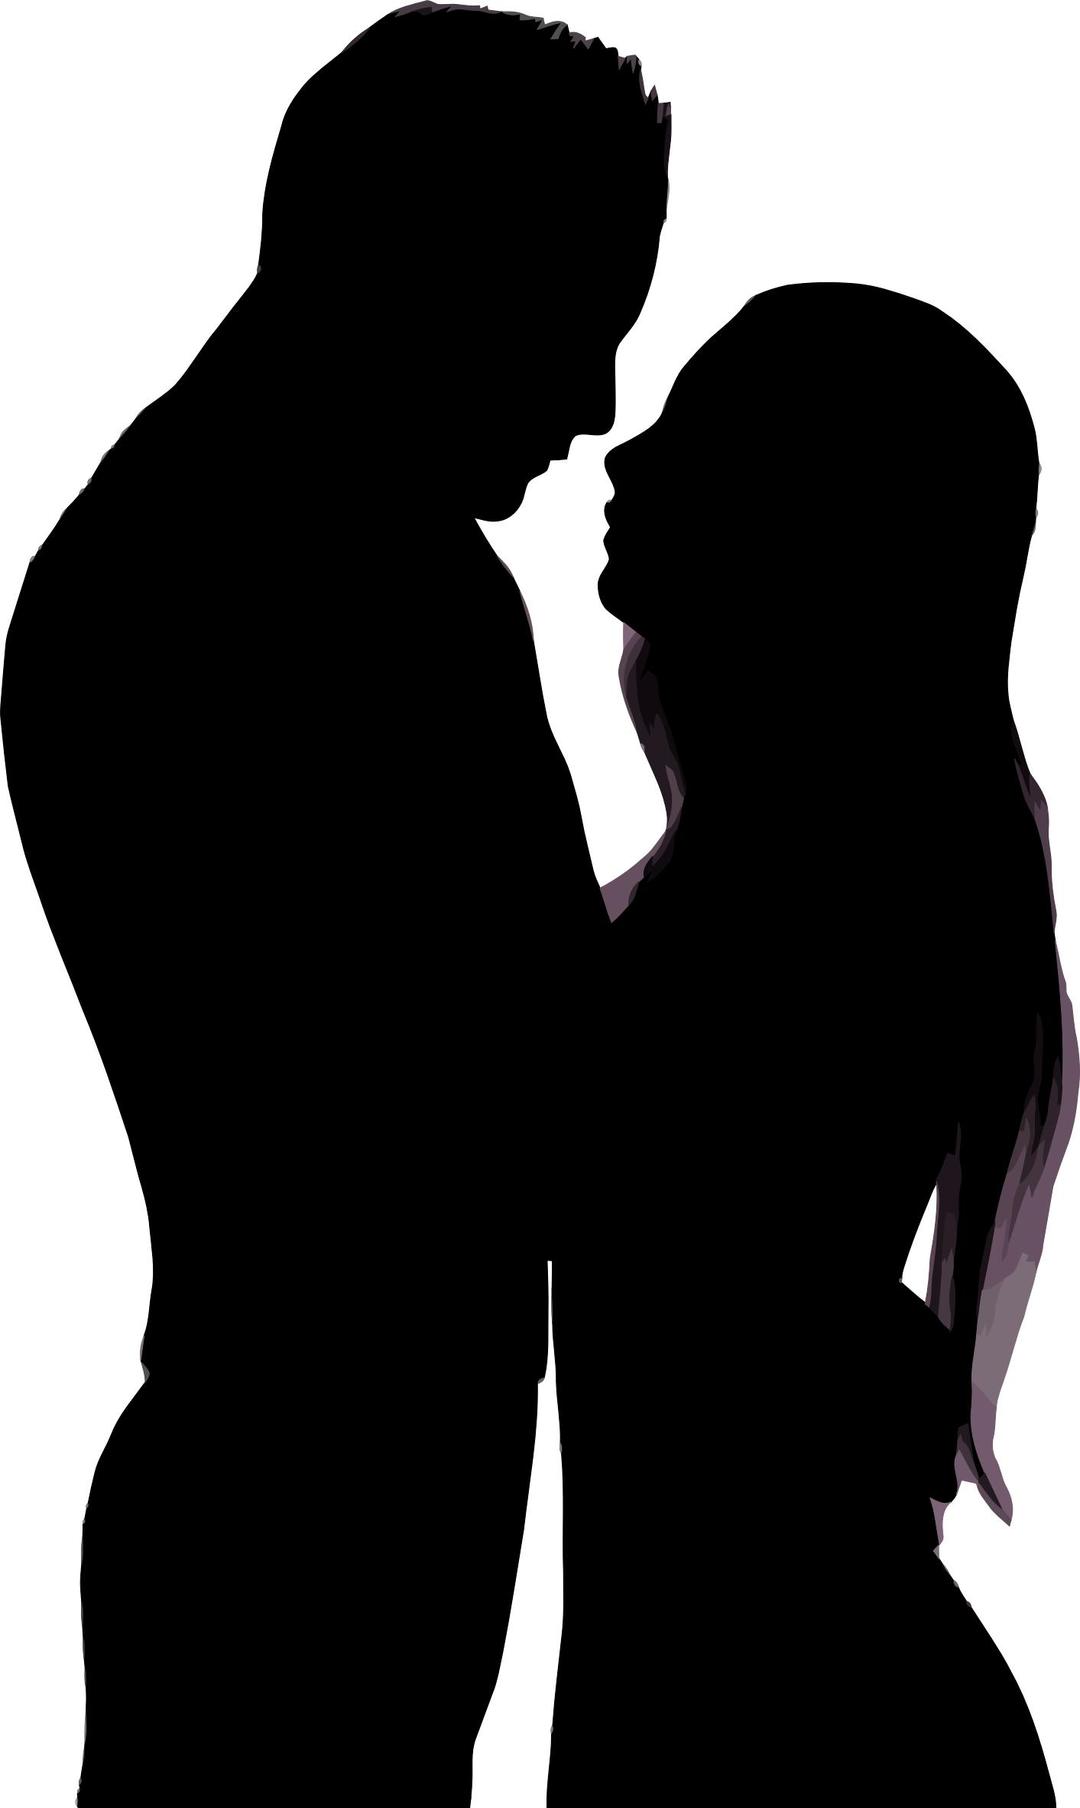 Embracing Couple Silhouette png transparent